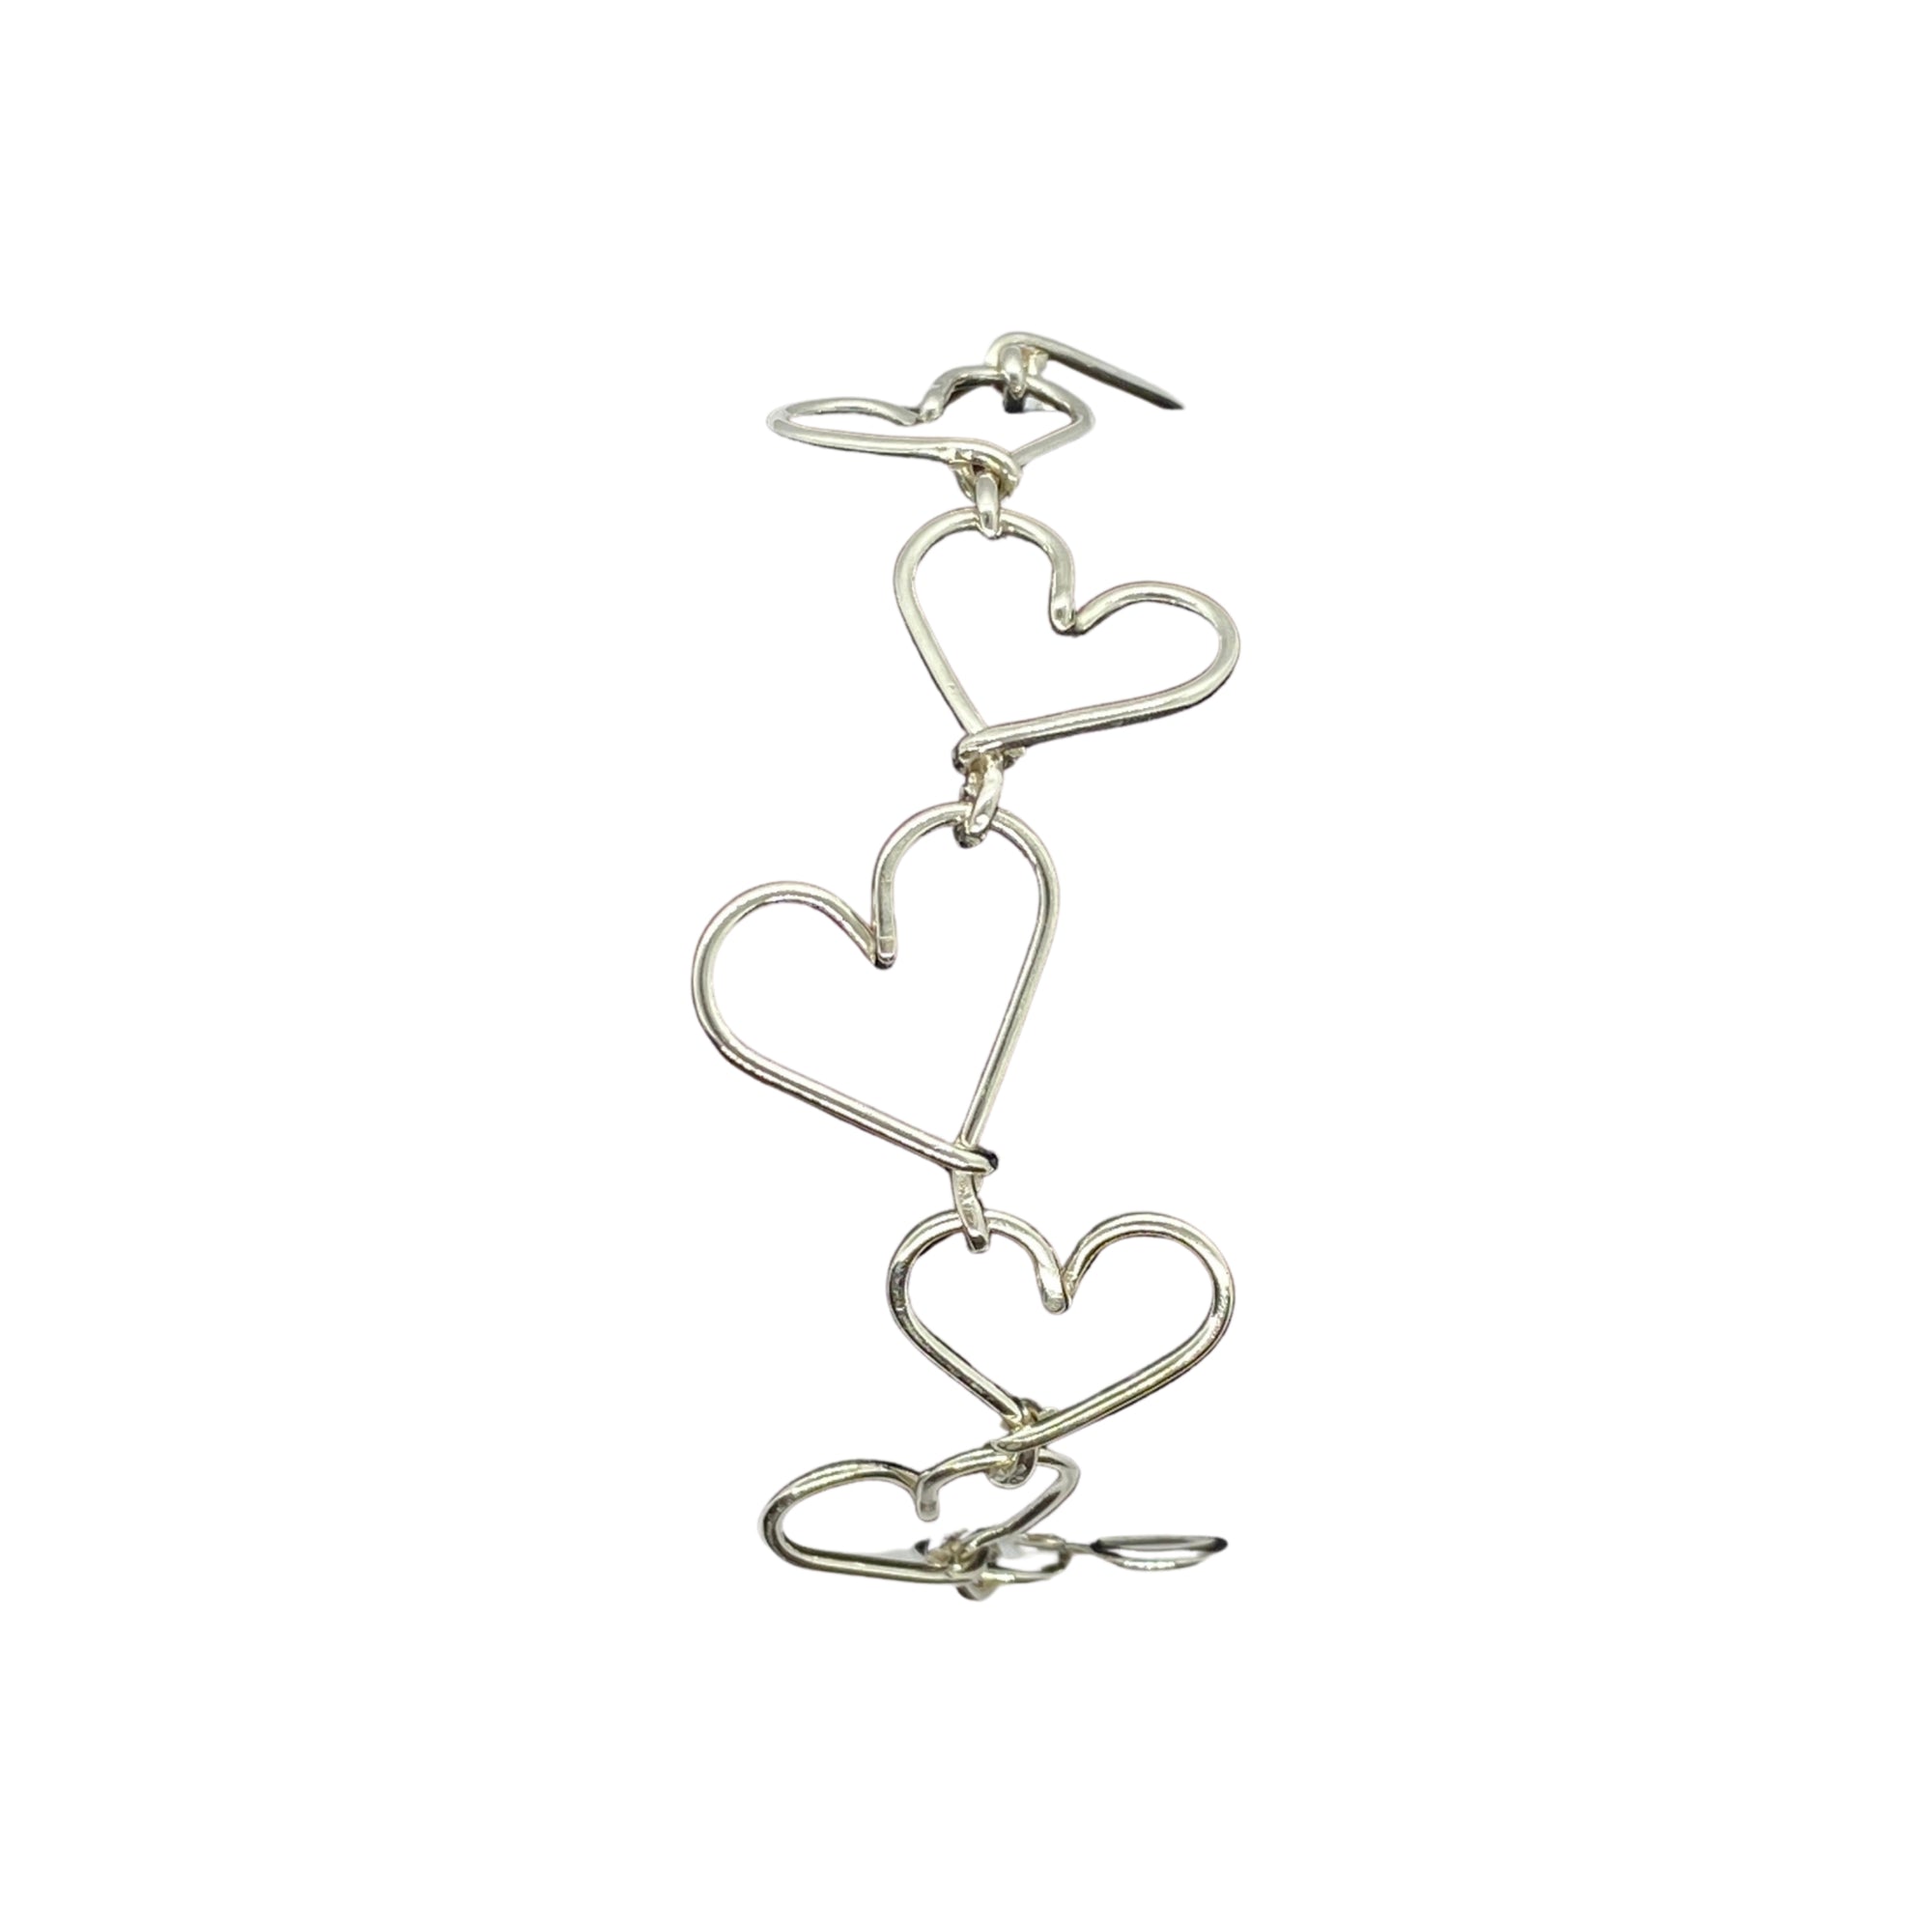 Camille Patton Loves Me Wire Jewelry Bracelet S01